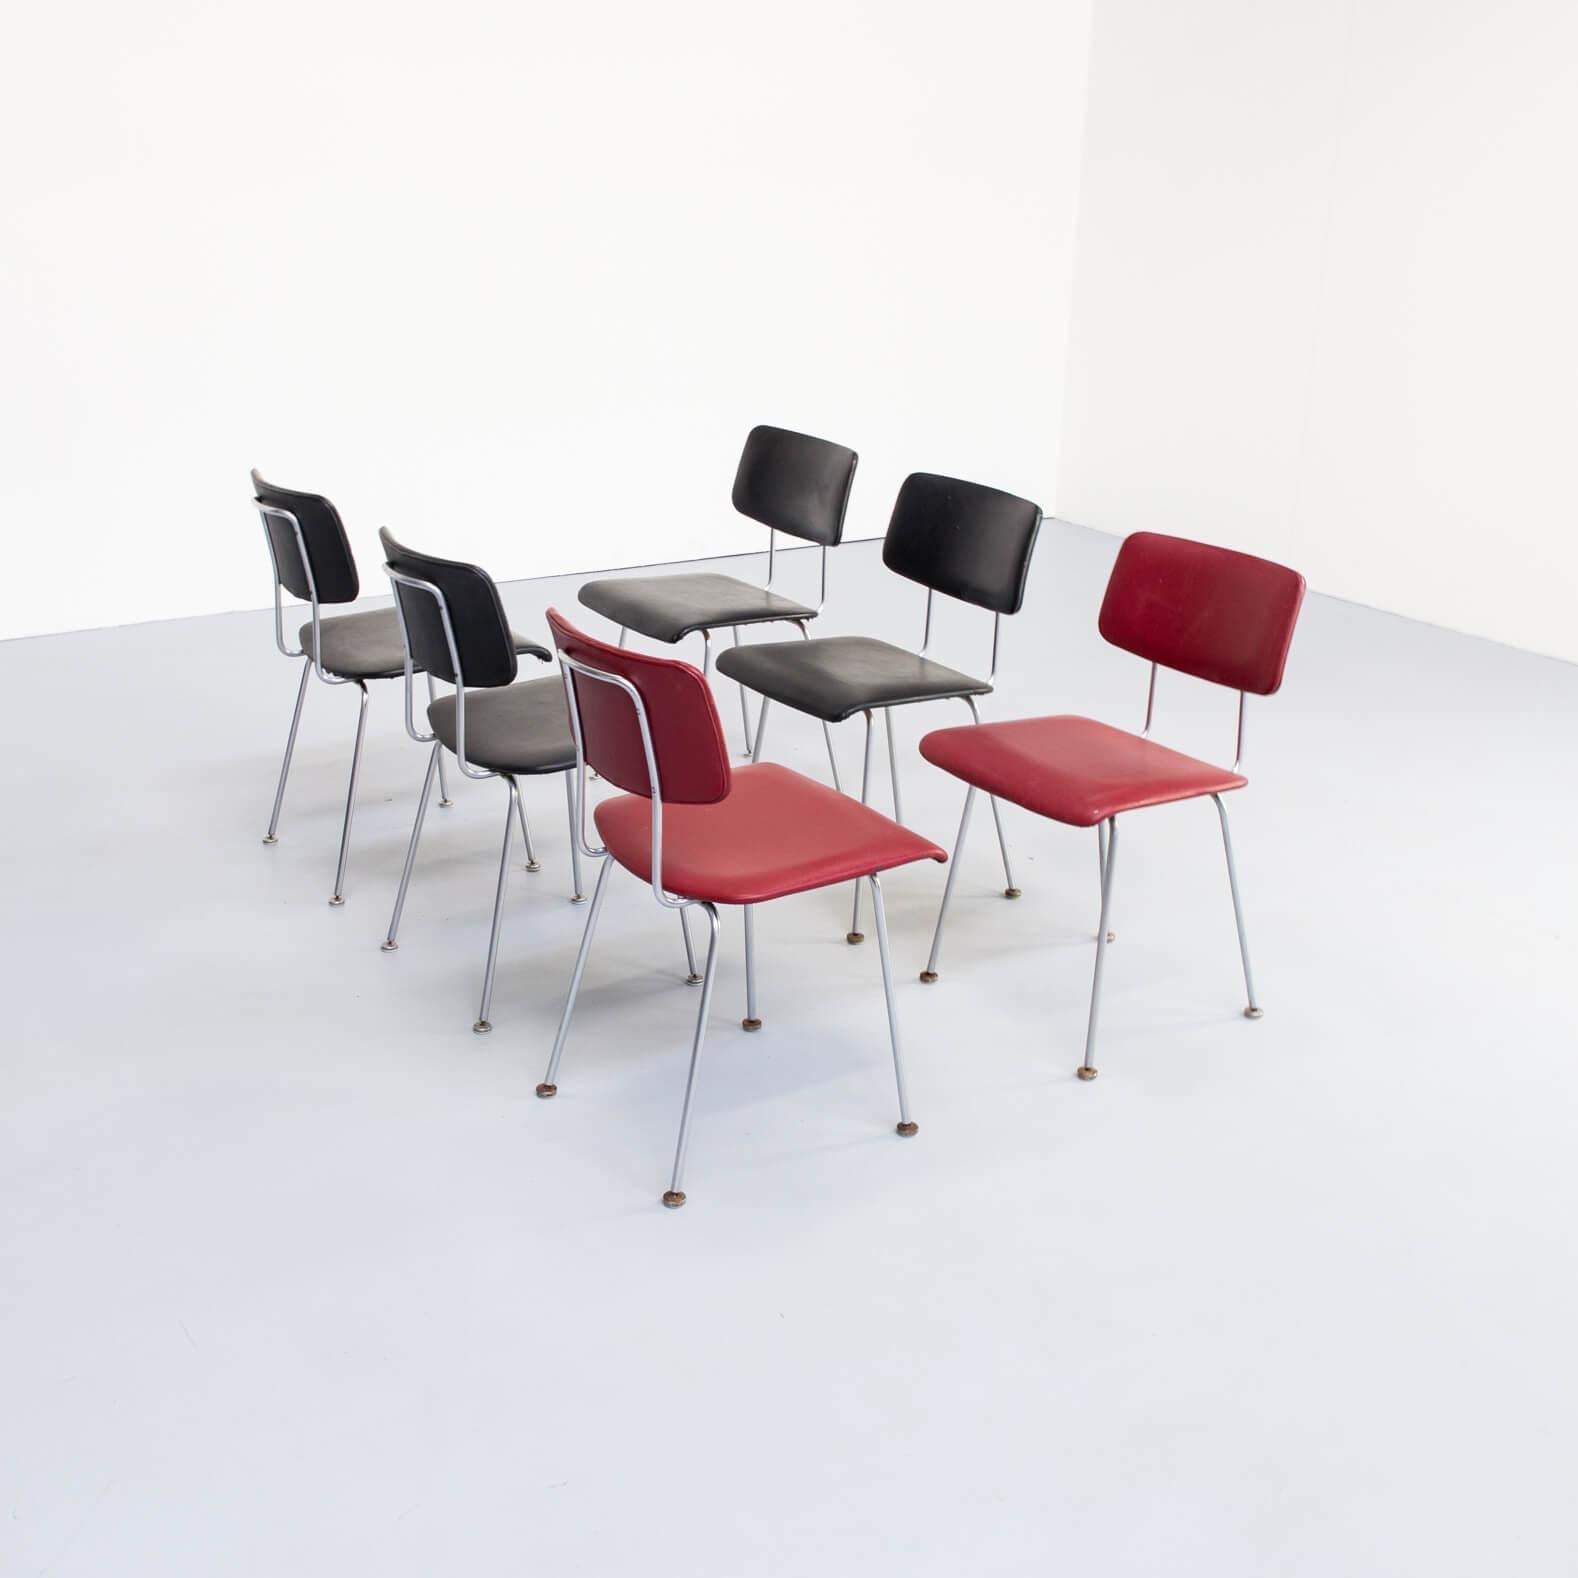 Late 20th Century 1980s Ontwerpbureau N.v. Gispen 1231/1232 Cirrus Chairs for Gispen, Set of 6 For Sale